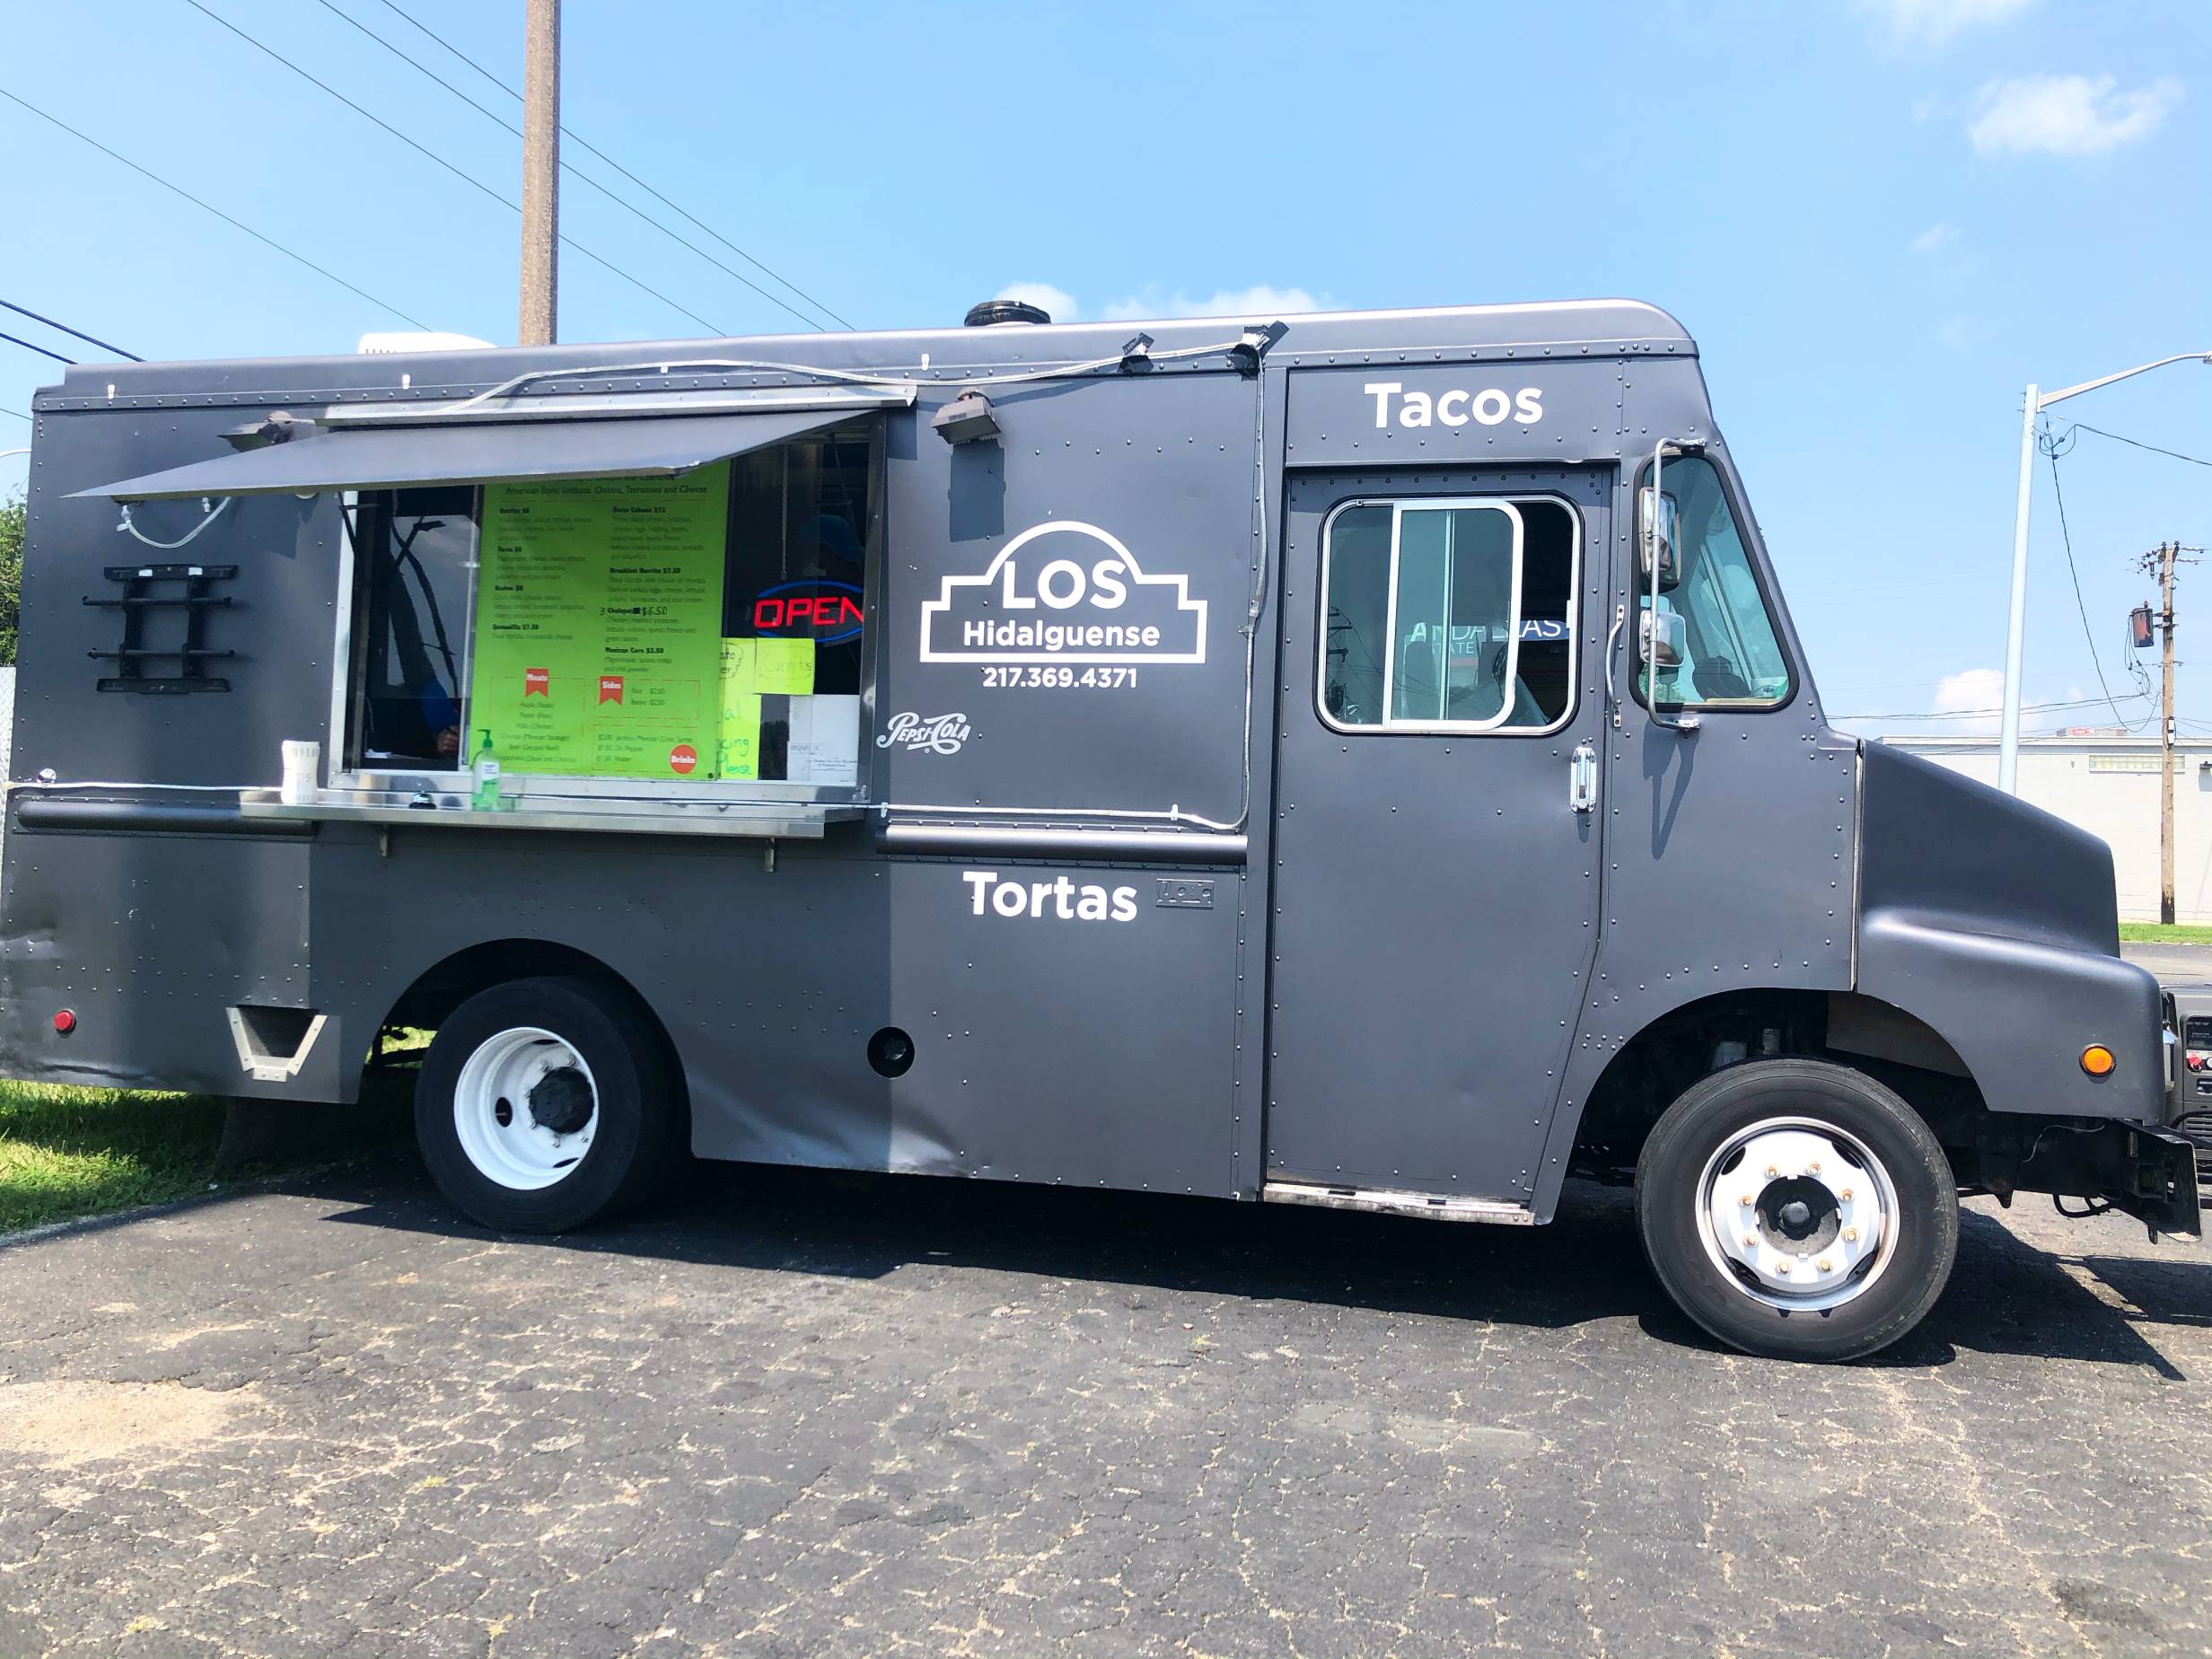 Los Hidalguense taco truck is a black taco truck parked in a parking lot in Champaign. Photo by Alyssa Buckley.